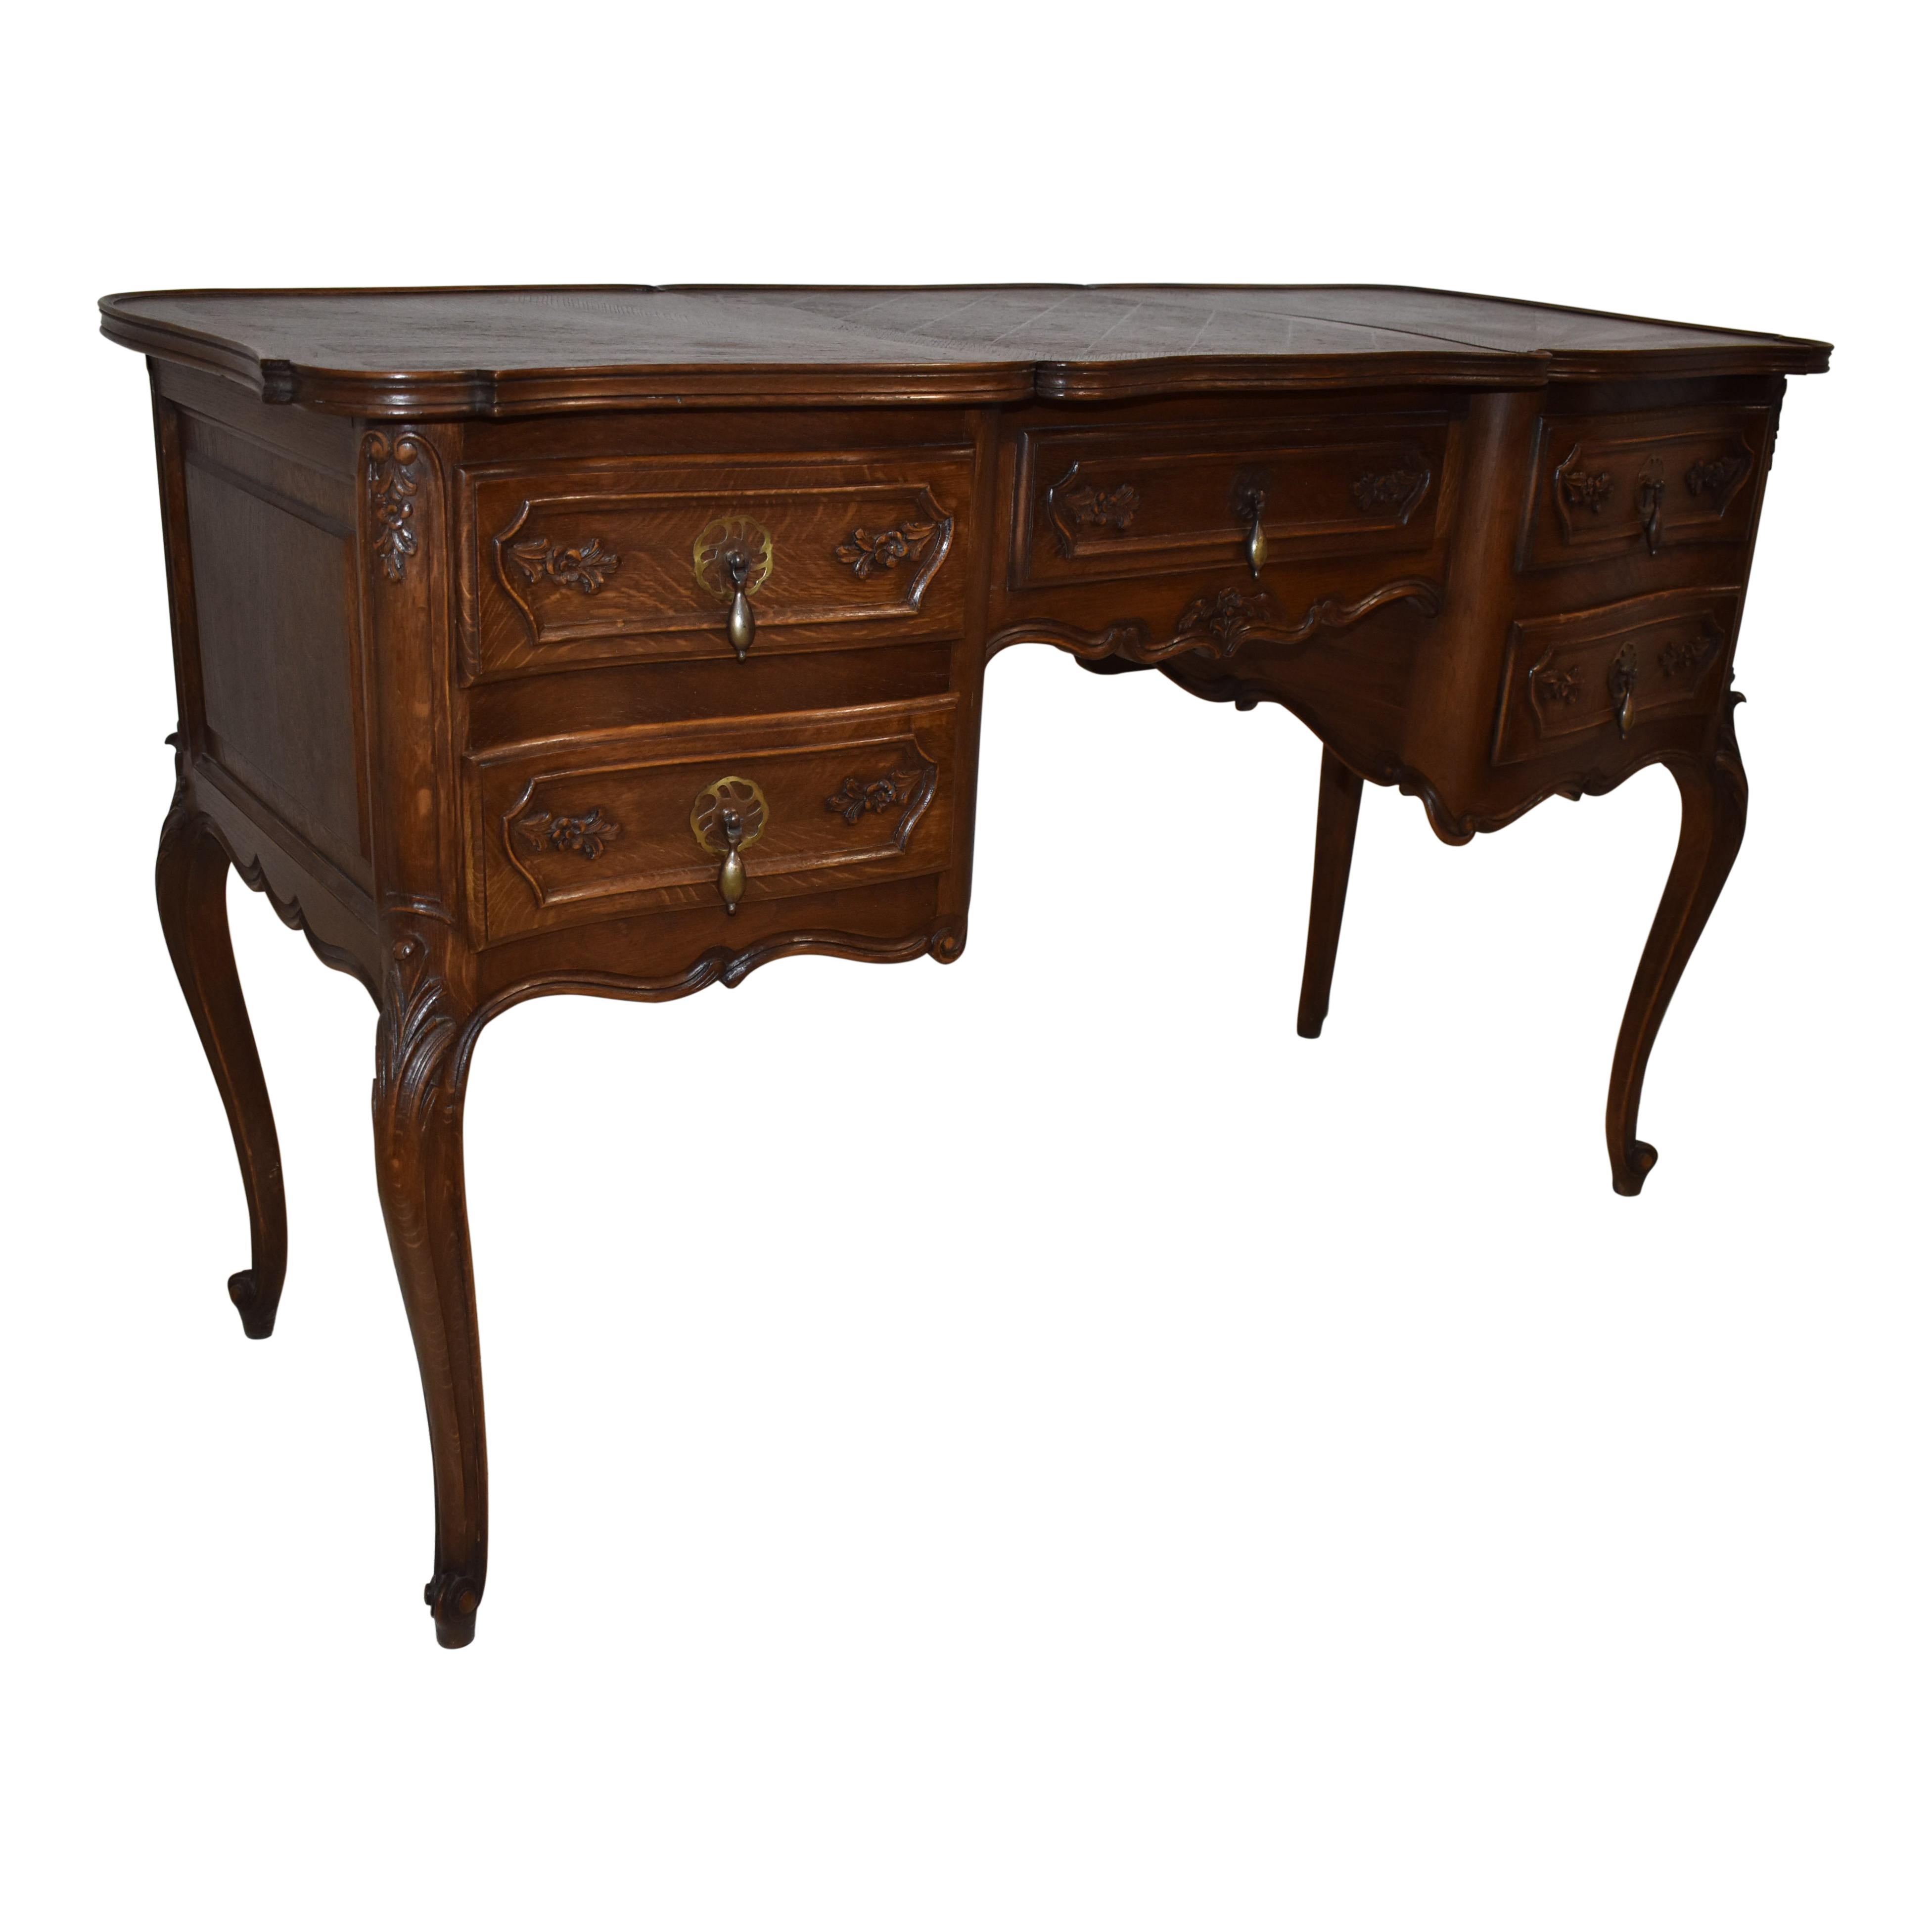 Get ready to start your day or night out at this stunning, oak dressing table from France. Crafted in the early 20th century, it has a wealth of detail in its elegant design. Its three piece hinged top has a raised outer edge. A quadrille pattern of